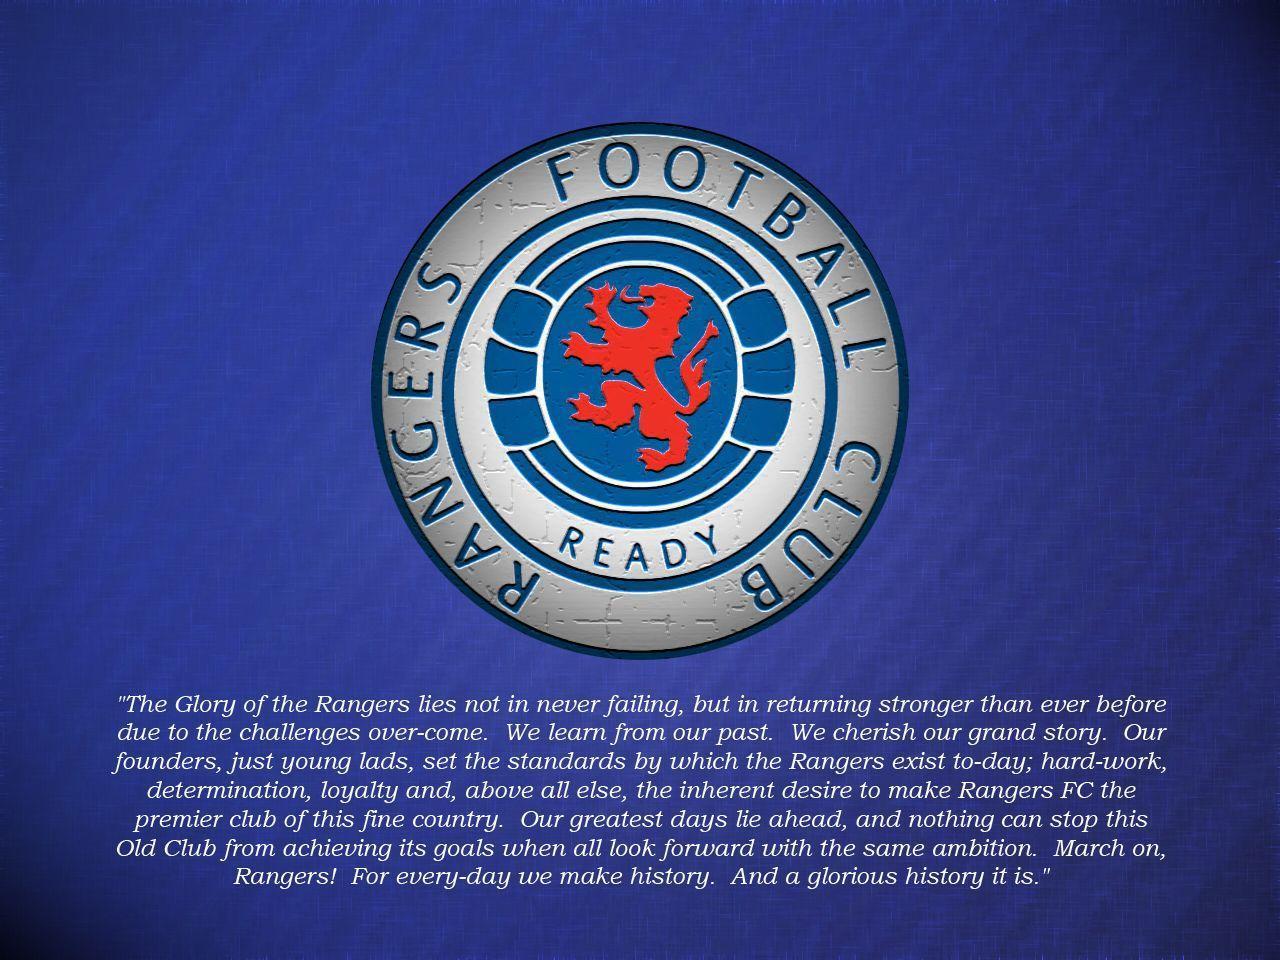 The best team on earth. The Glasgow Rangers